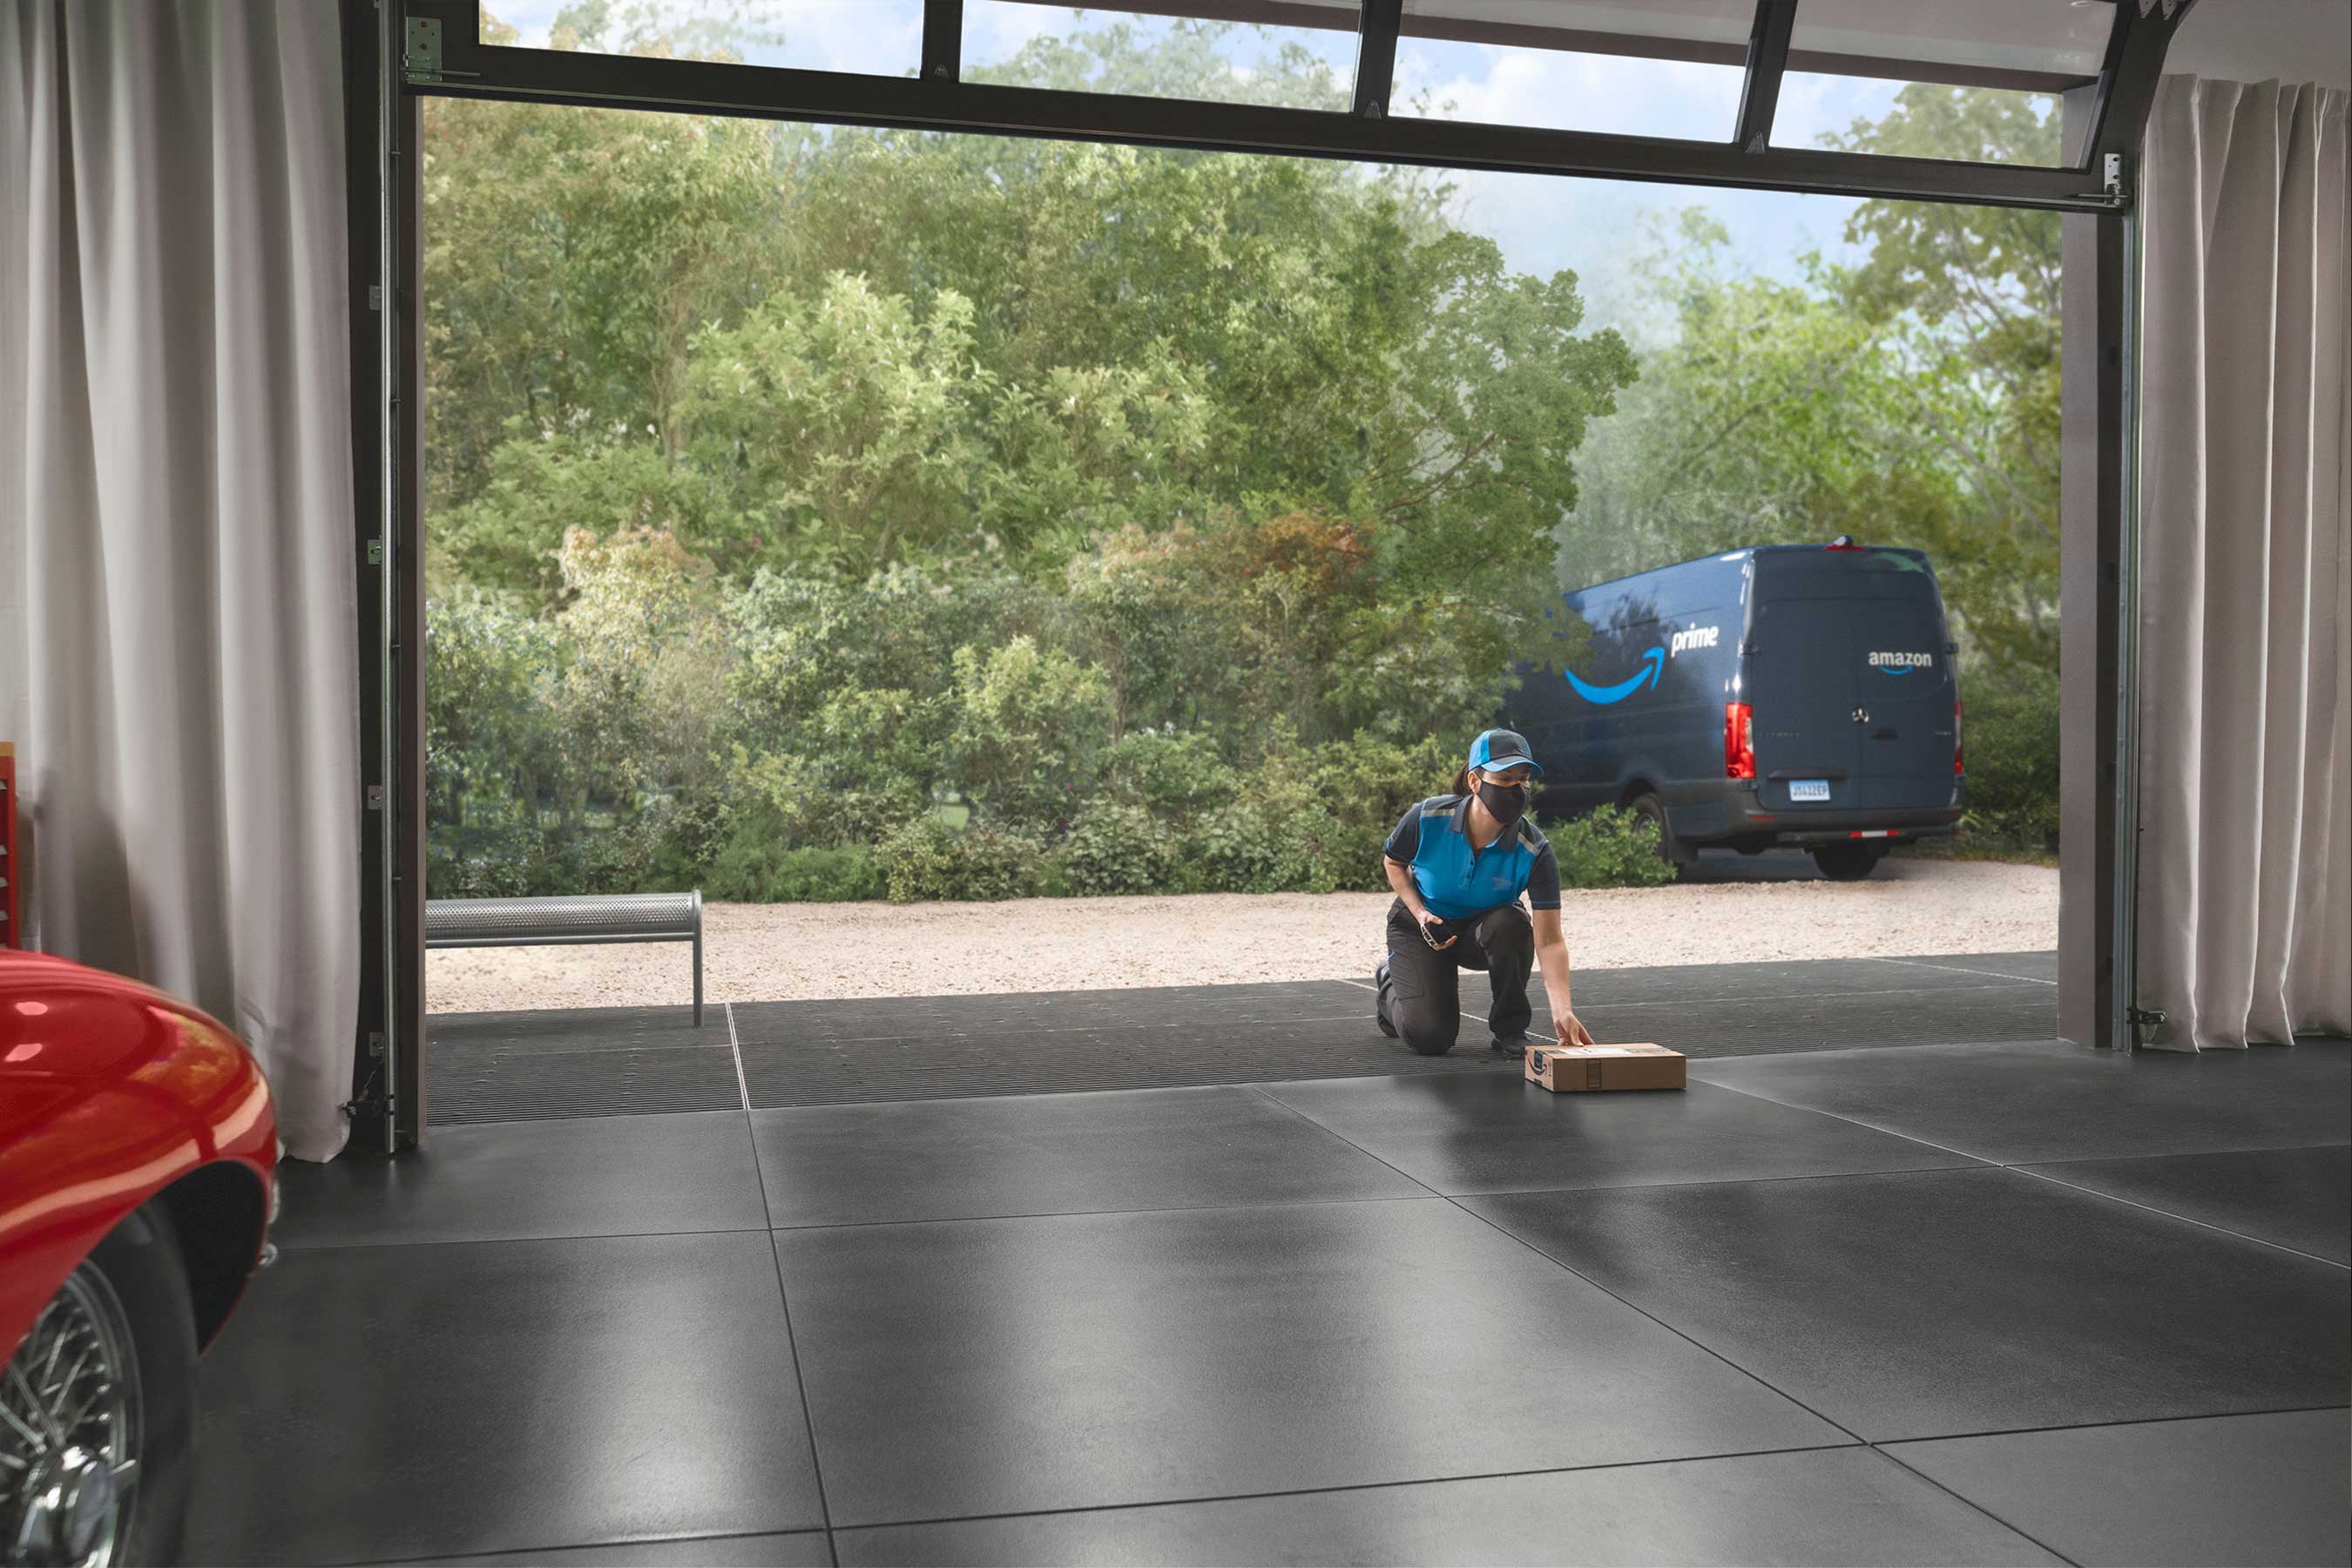 The LiftMaster Secure View works seamlessly with Key by Amazon In-Garage Delivery.